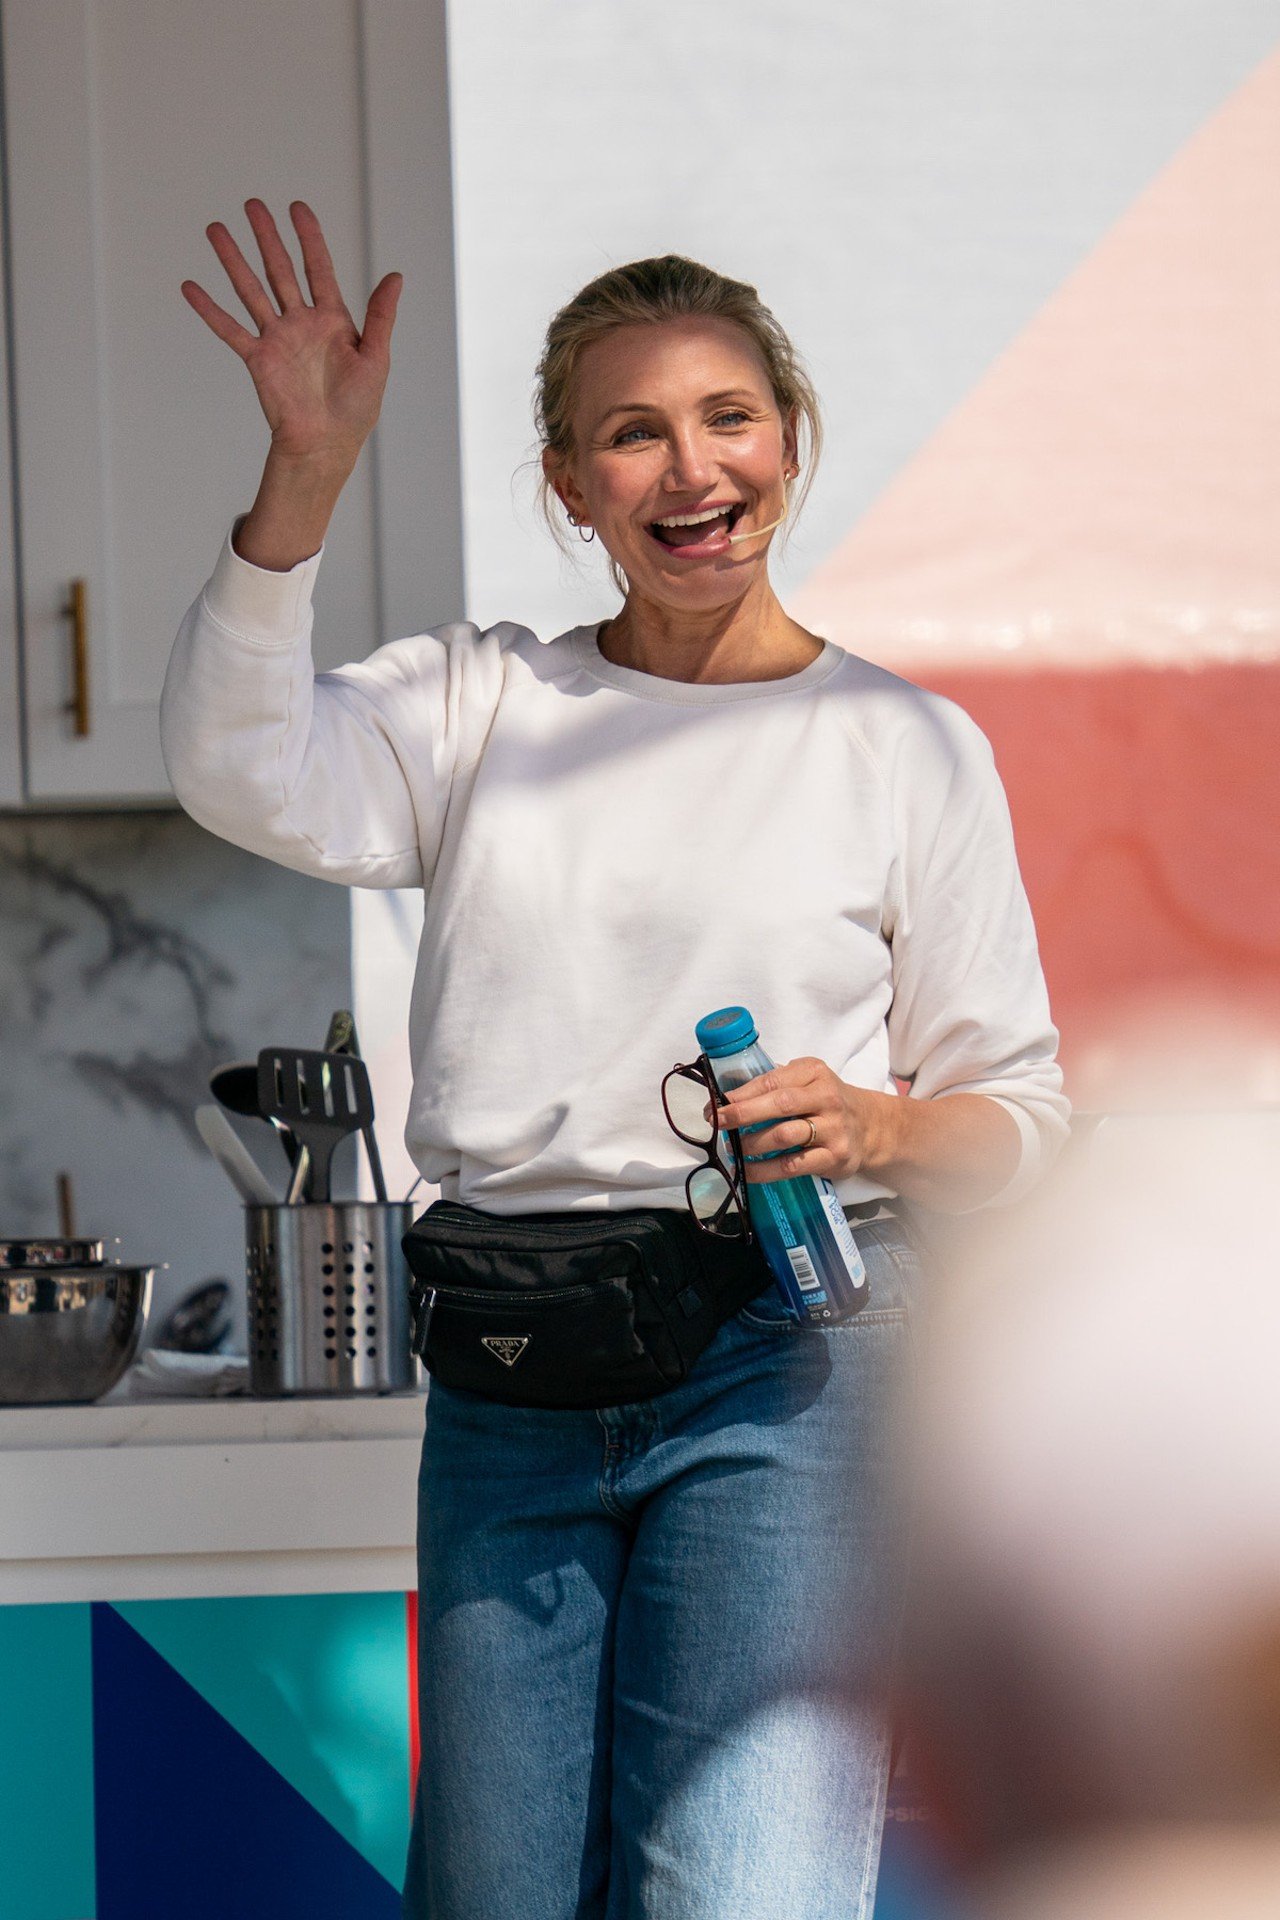 Cameron Diaz greets the crowd during the 2023 Kroger Wellness Festival